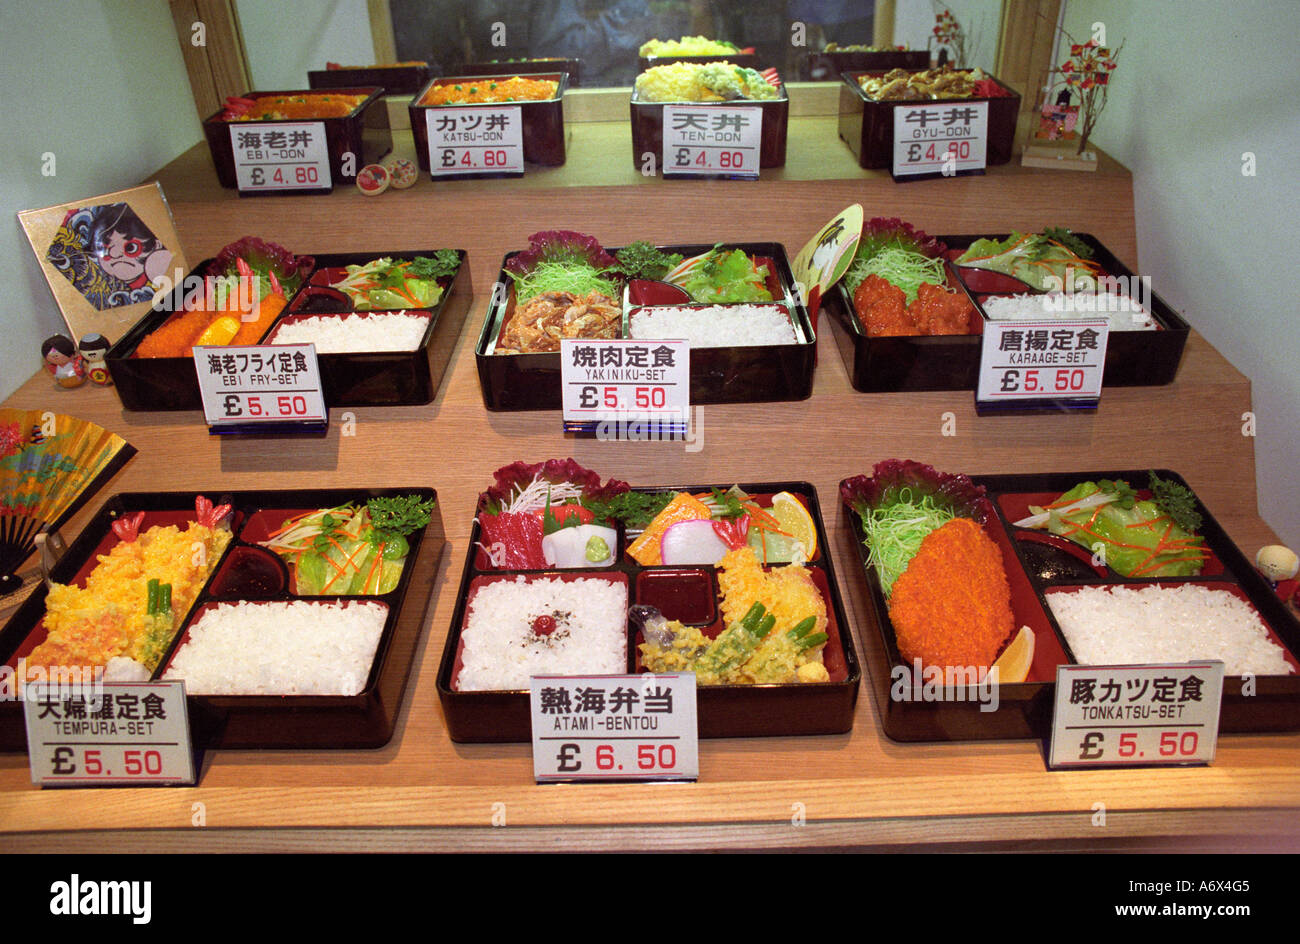 Bento display showing copies of food available made from wax in uk Stock Photo